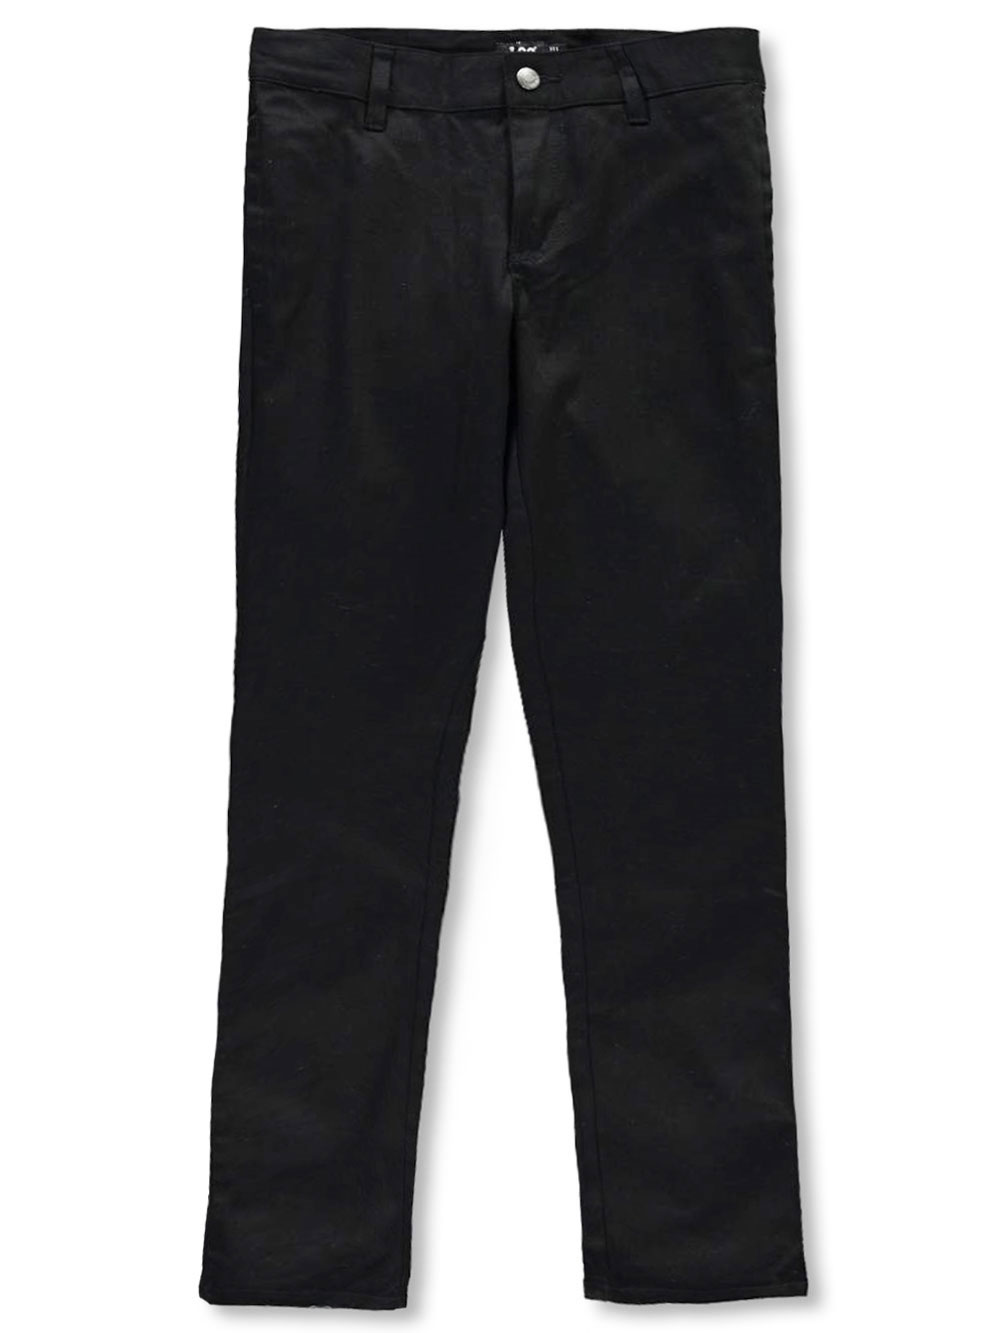 Size Junior 7 Pants for Girls